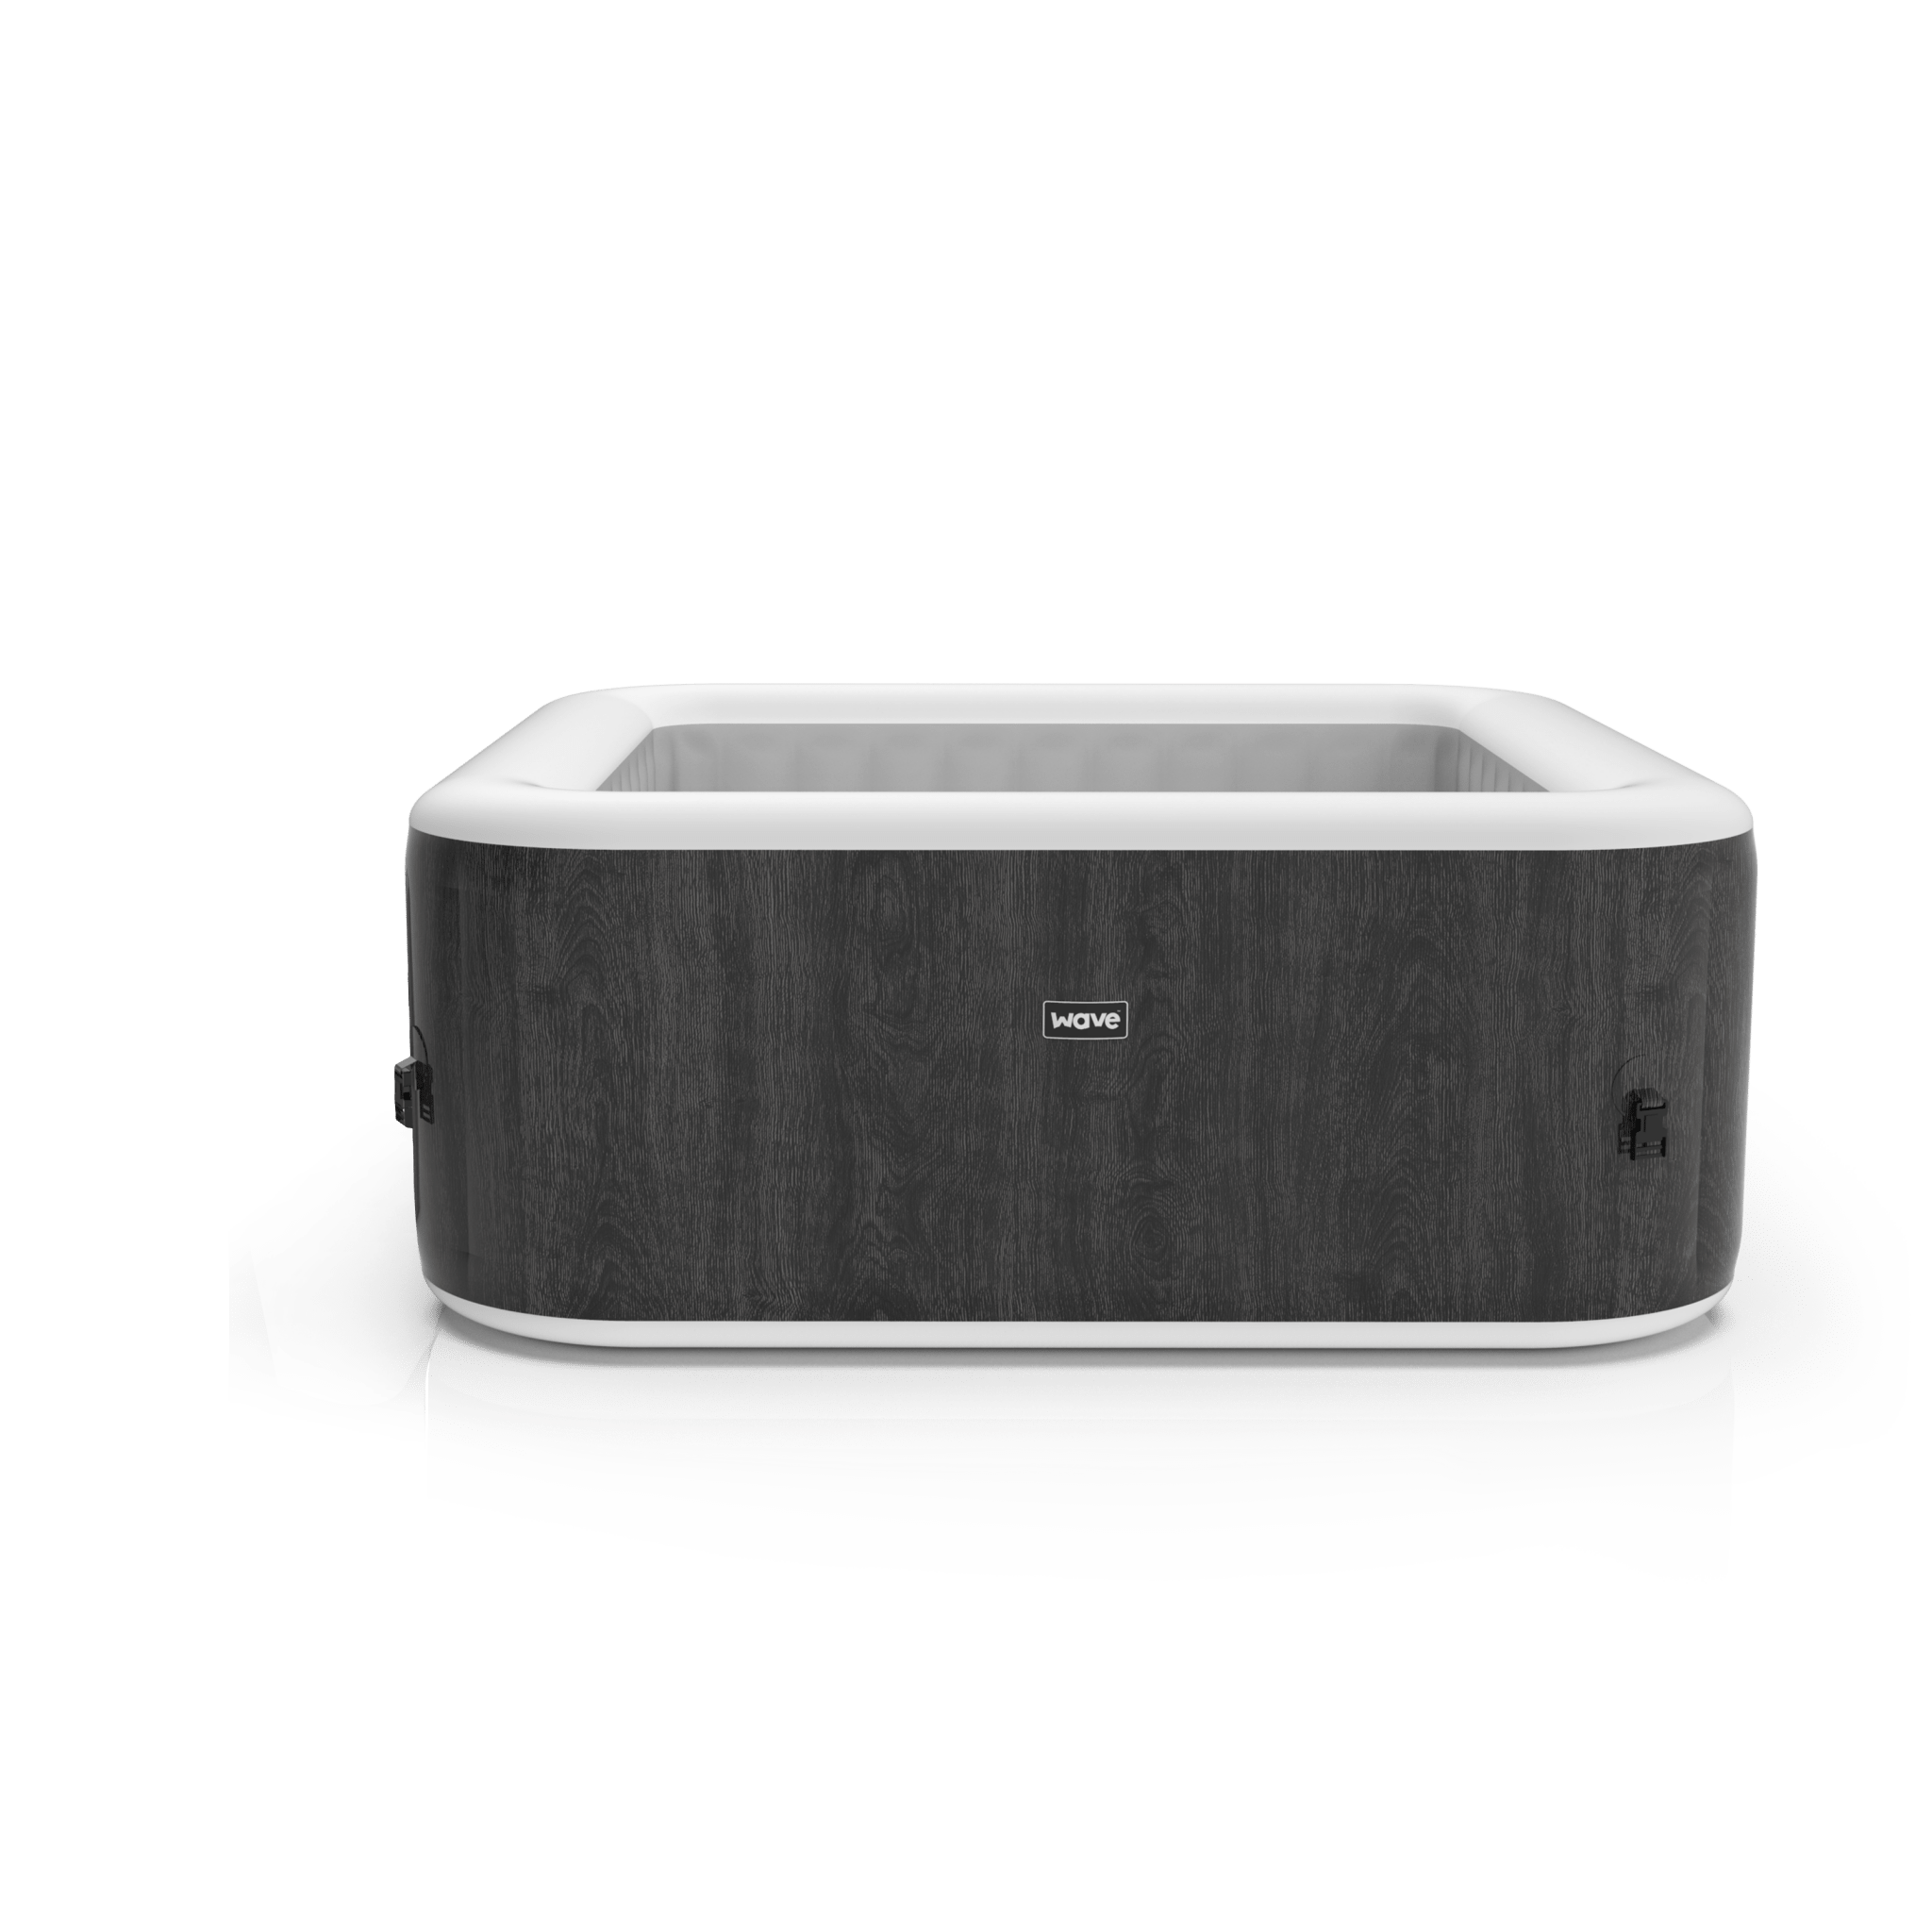 Wave Spa Pacific 4 Person Grey Wood External Liner - Body Replacement - Hot Tub Liner - Wave Spas USA